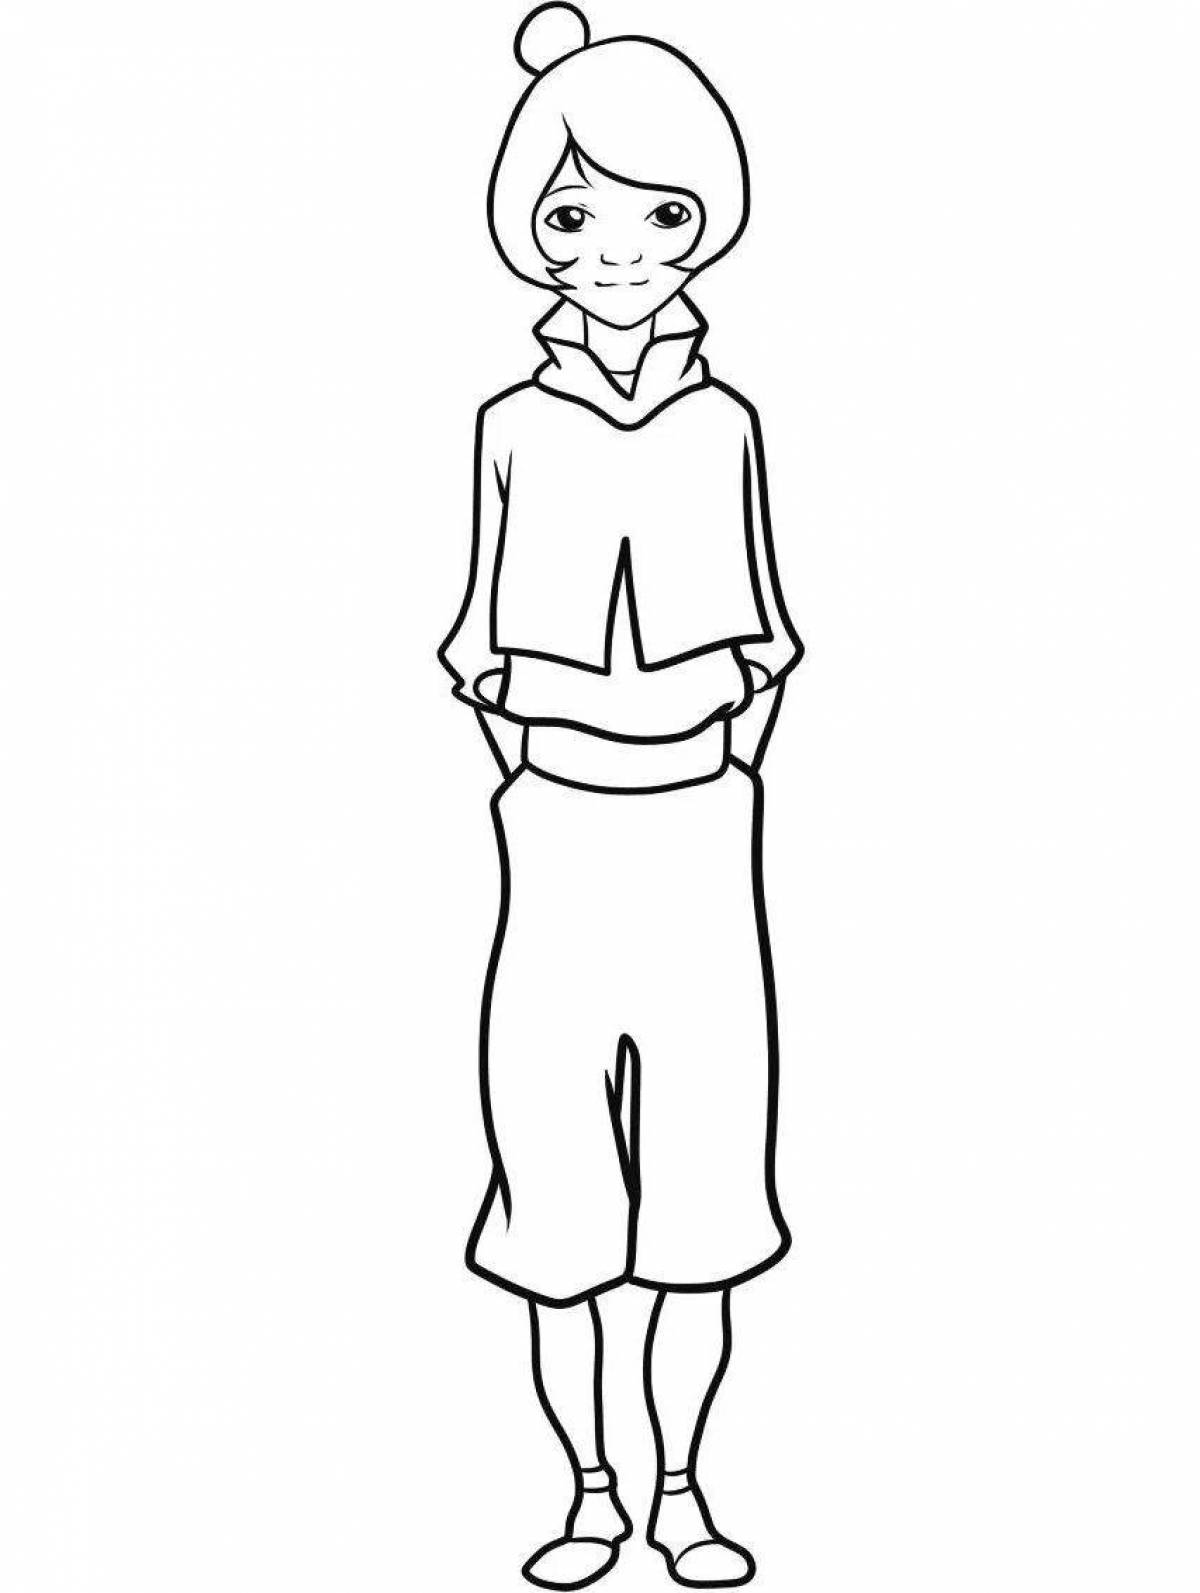 Korra bold avatar coloring page